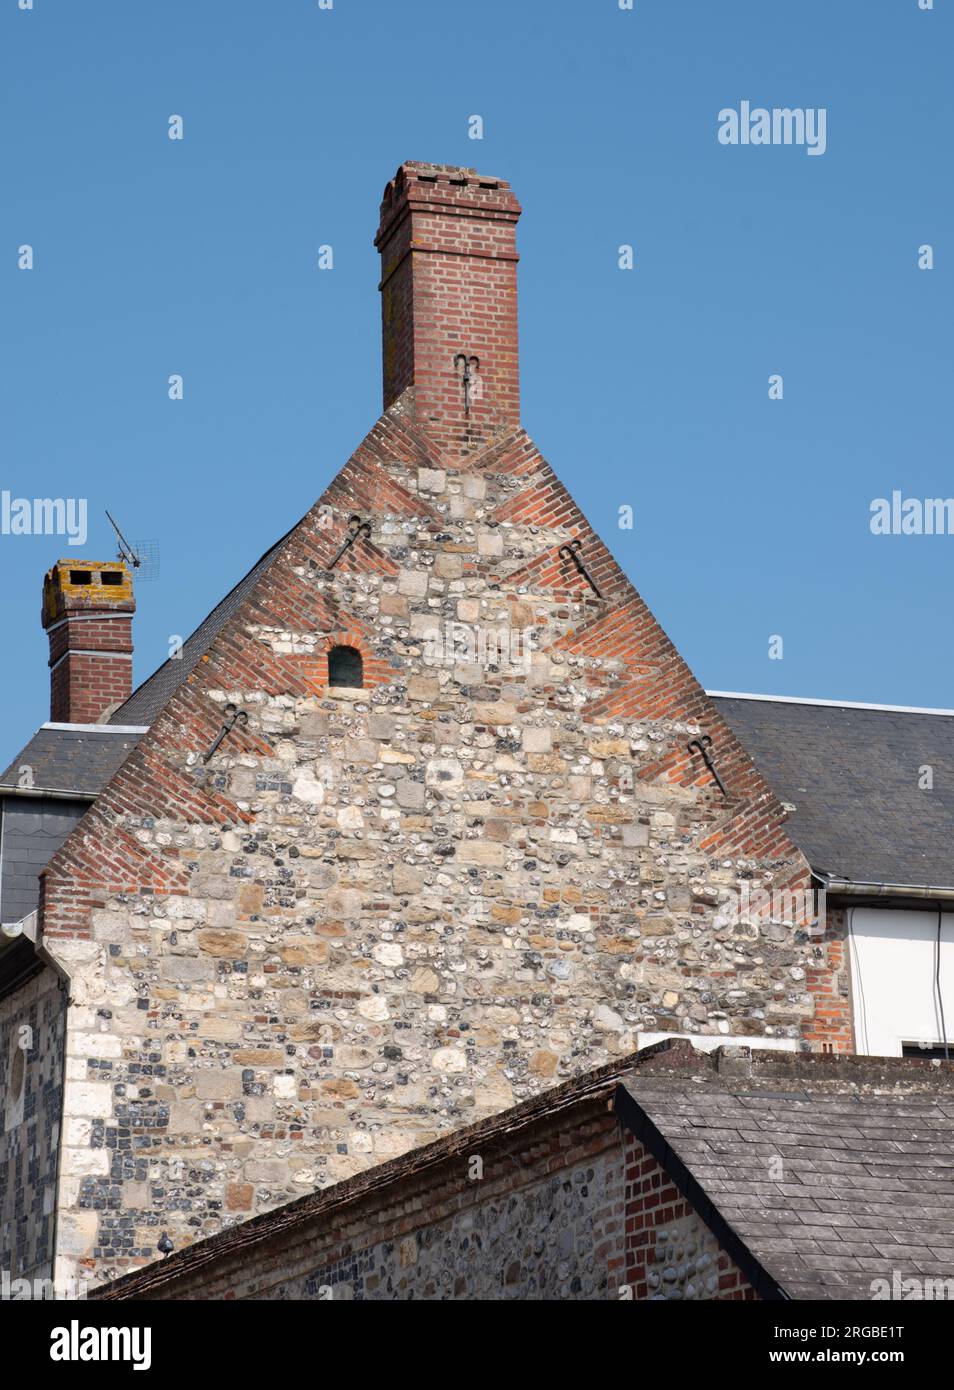 Gable end tumbled redbrick in the old town of Saint Valery sur Somme Stock Photo